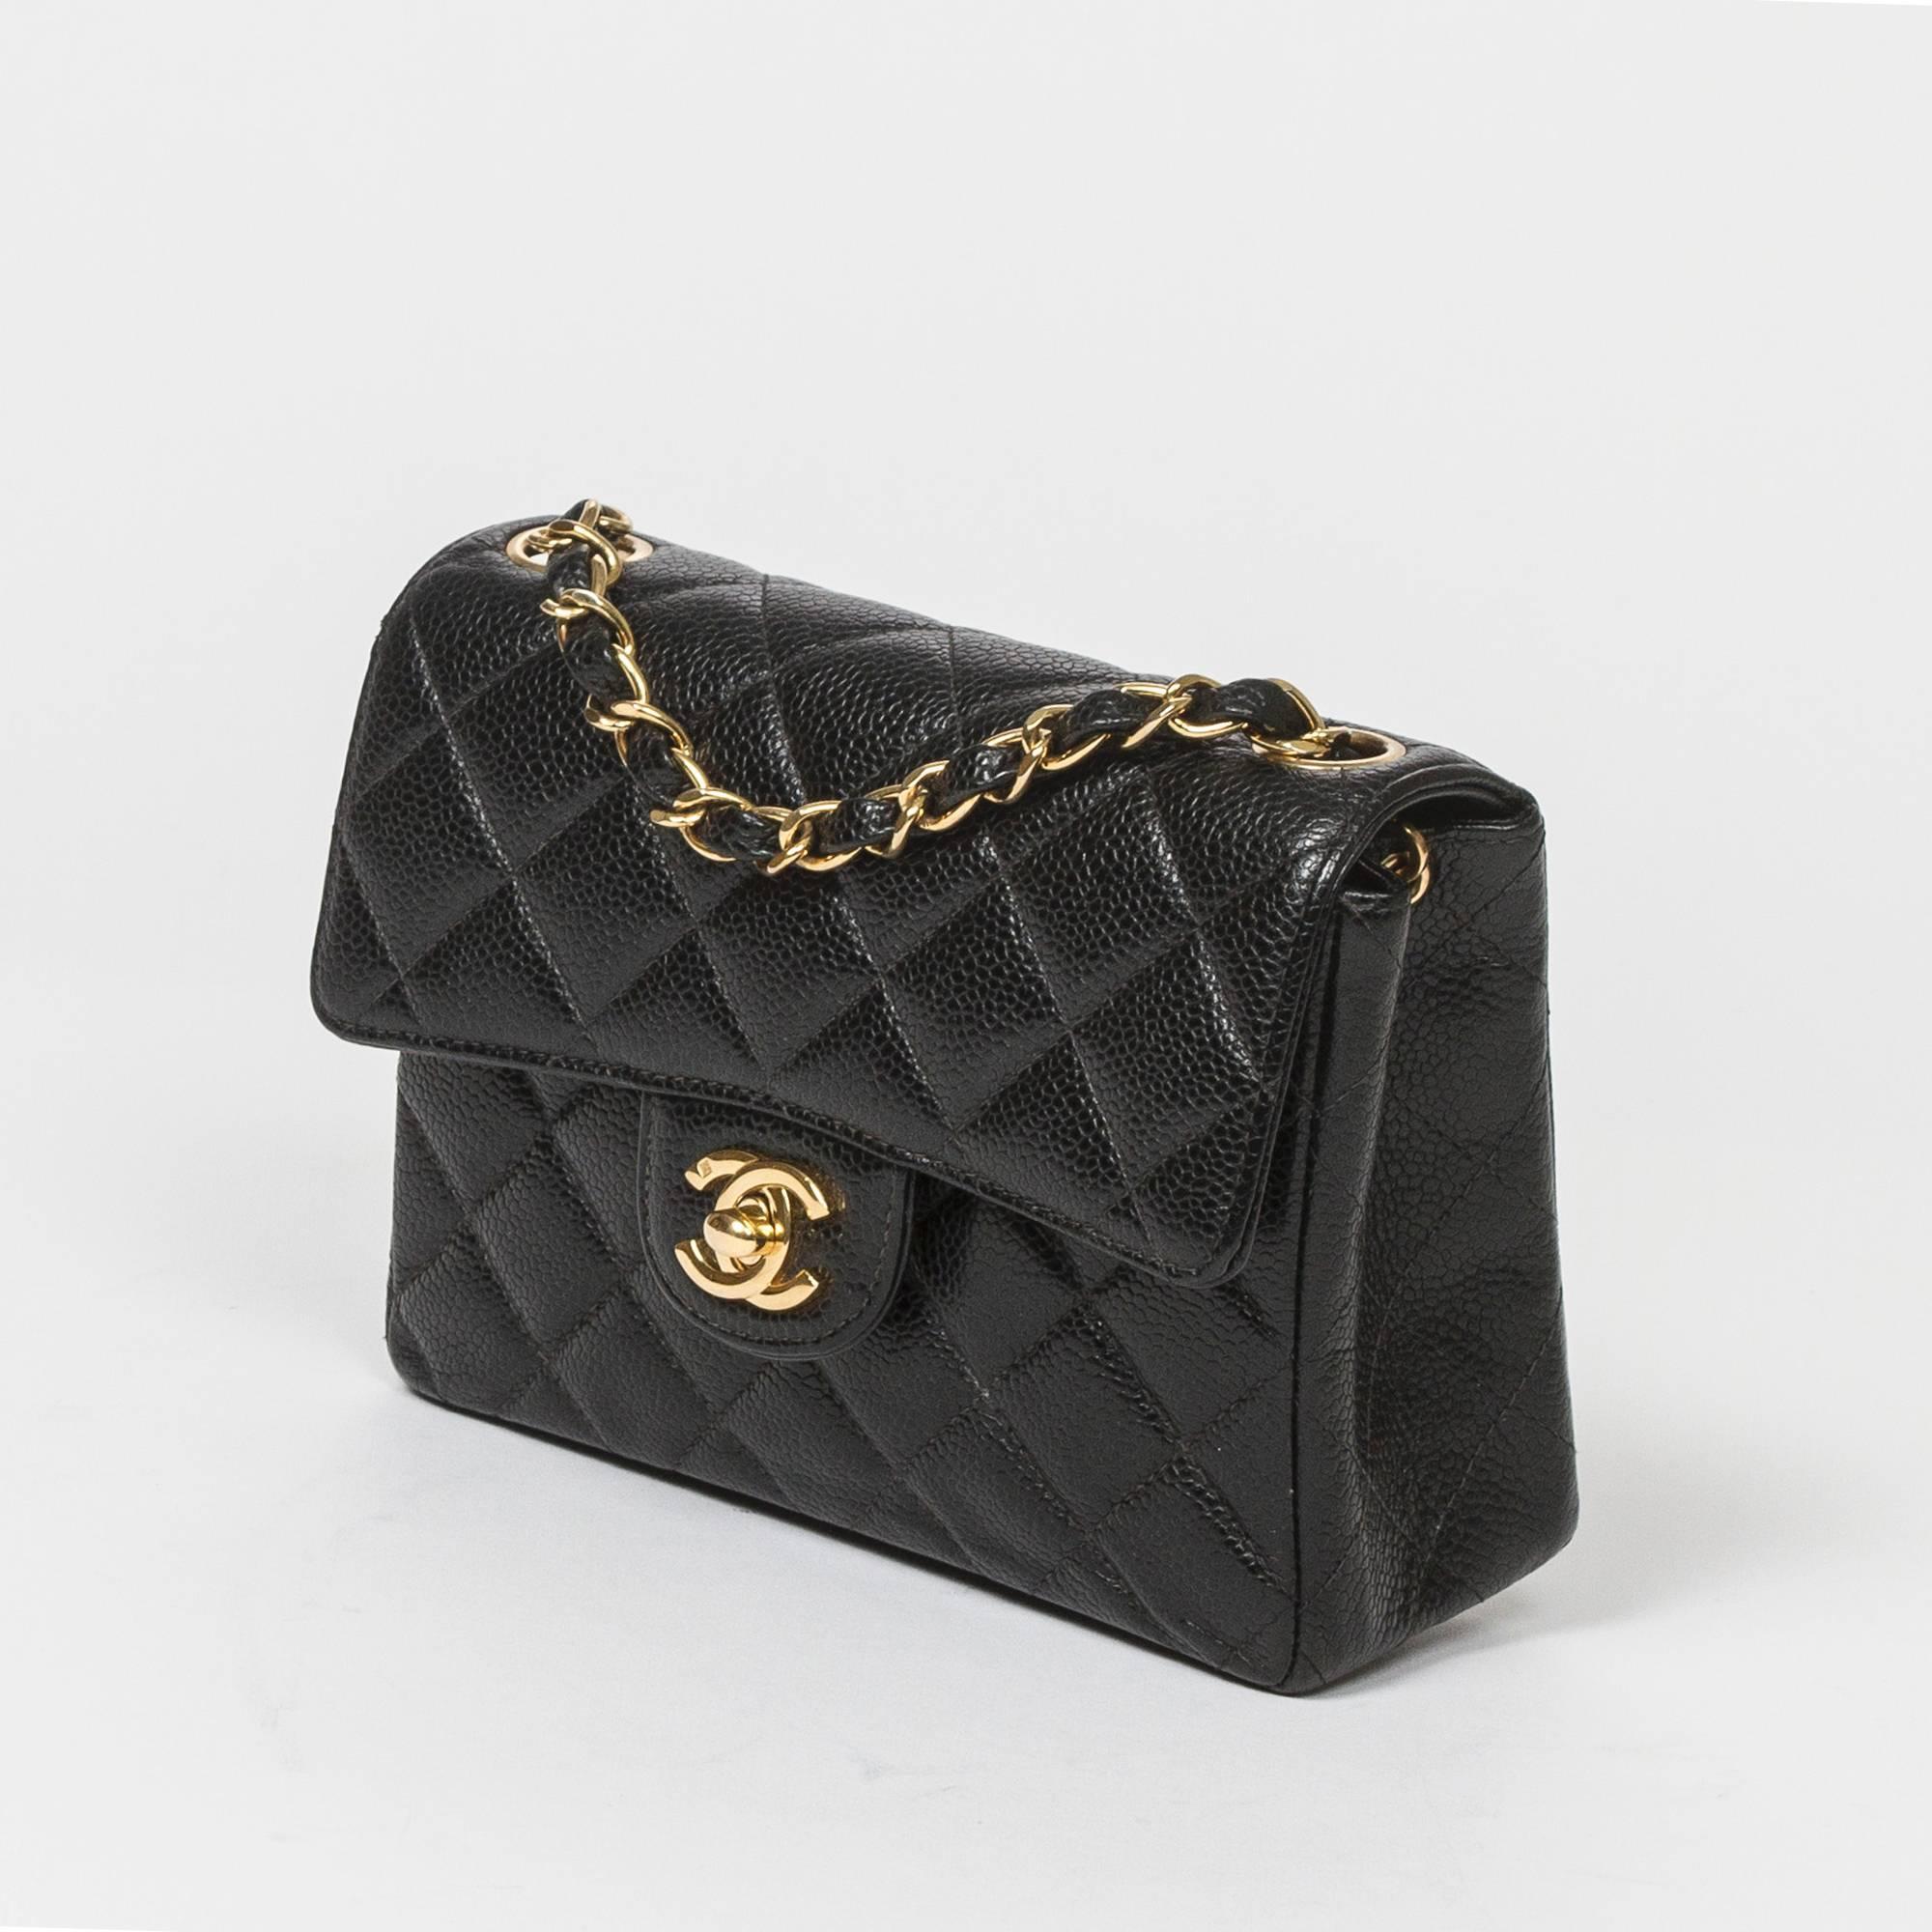 Classic Mini Flap Bag in black quilted caviar leather with long chain strap interlaced with black leather and signature CC turlock, gold hardware. Back slip pocket. Black leather lined interior with one slip pocket and zip pocket. Gold tone heat